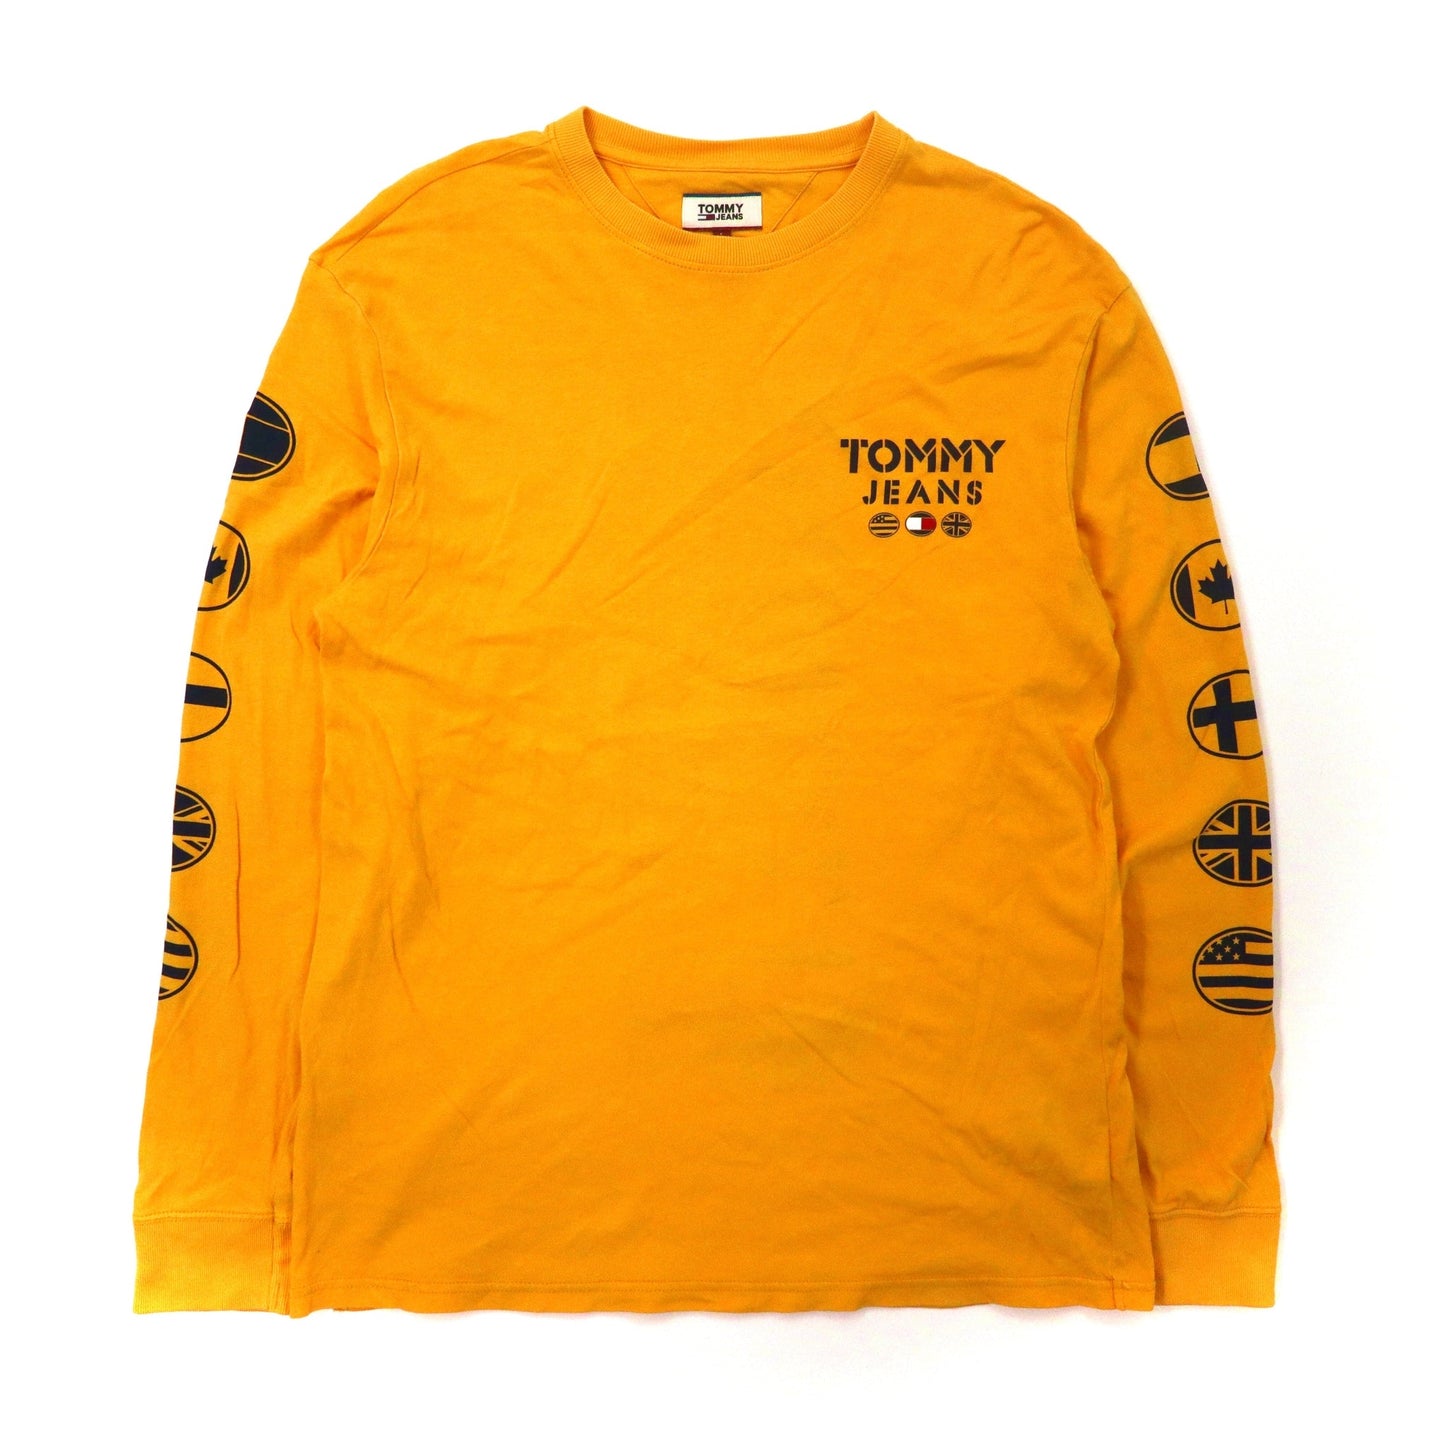 TOMMY JEANS ロングスリーブTシャツ L イエロー コットン 袖ロゴ 両面ロゴプリント-TOMMY JEANS-古着